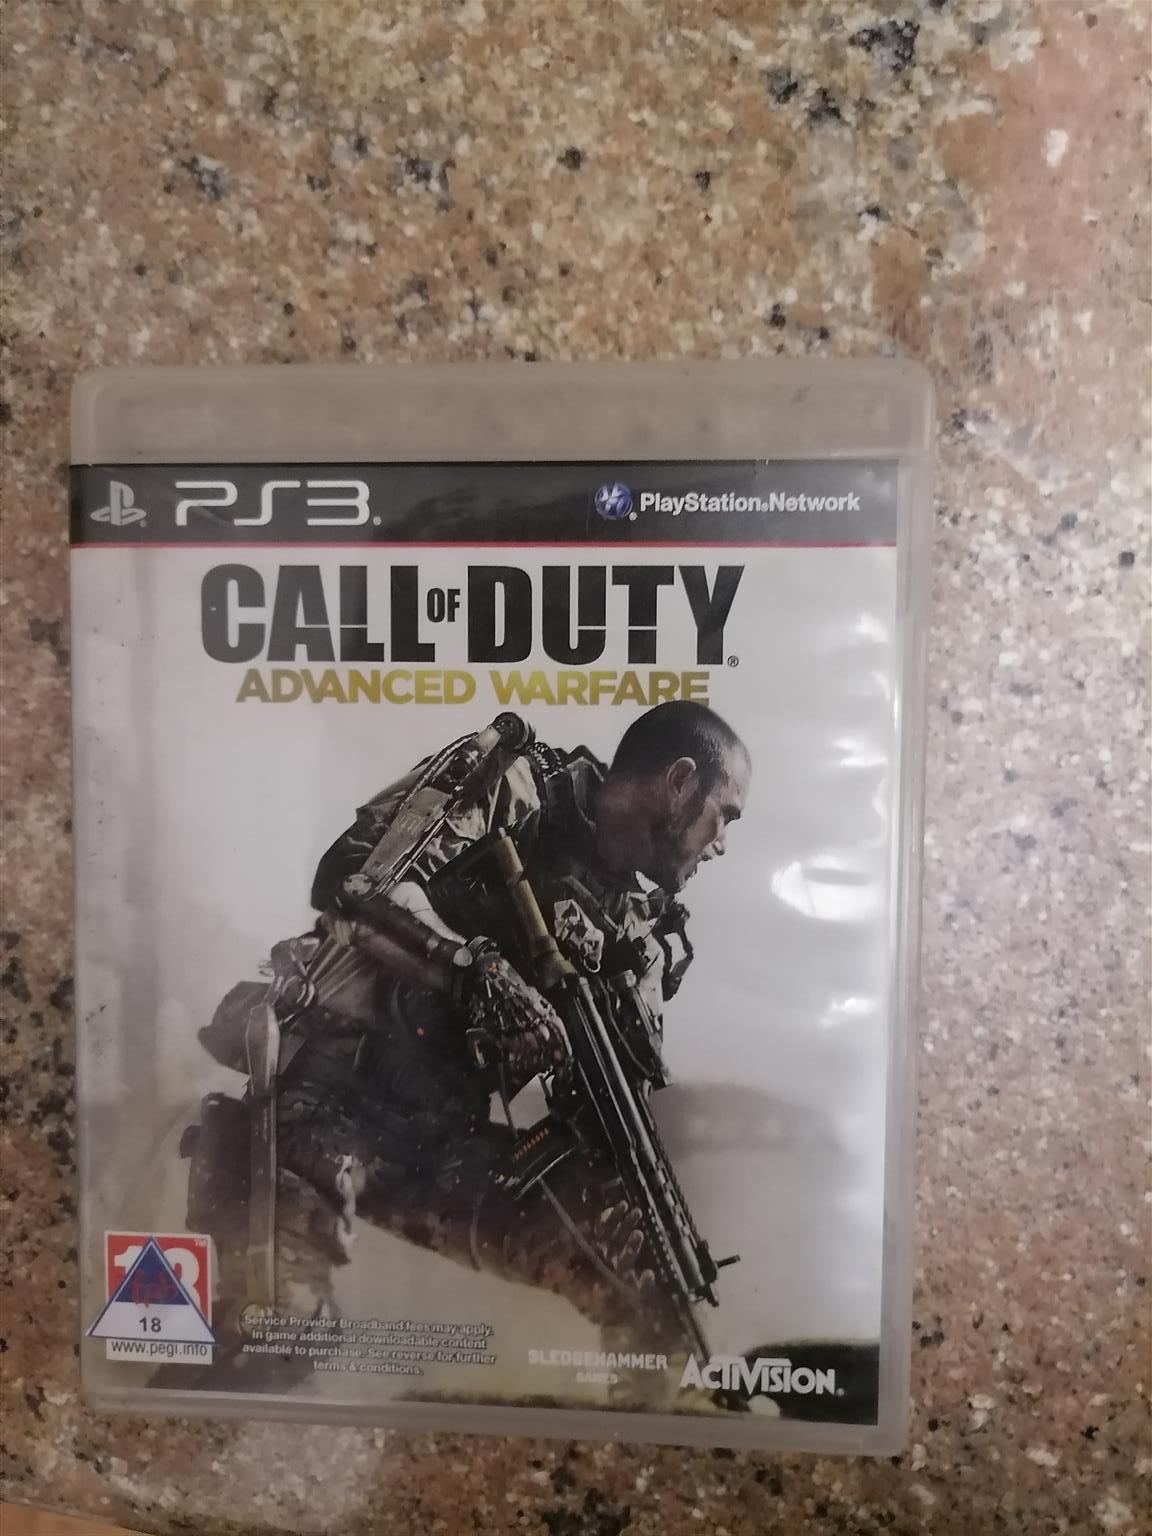 Call of Duty : Advanced Warfare for PS3 for sale ! 